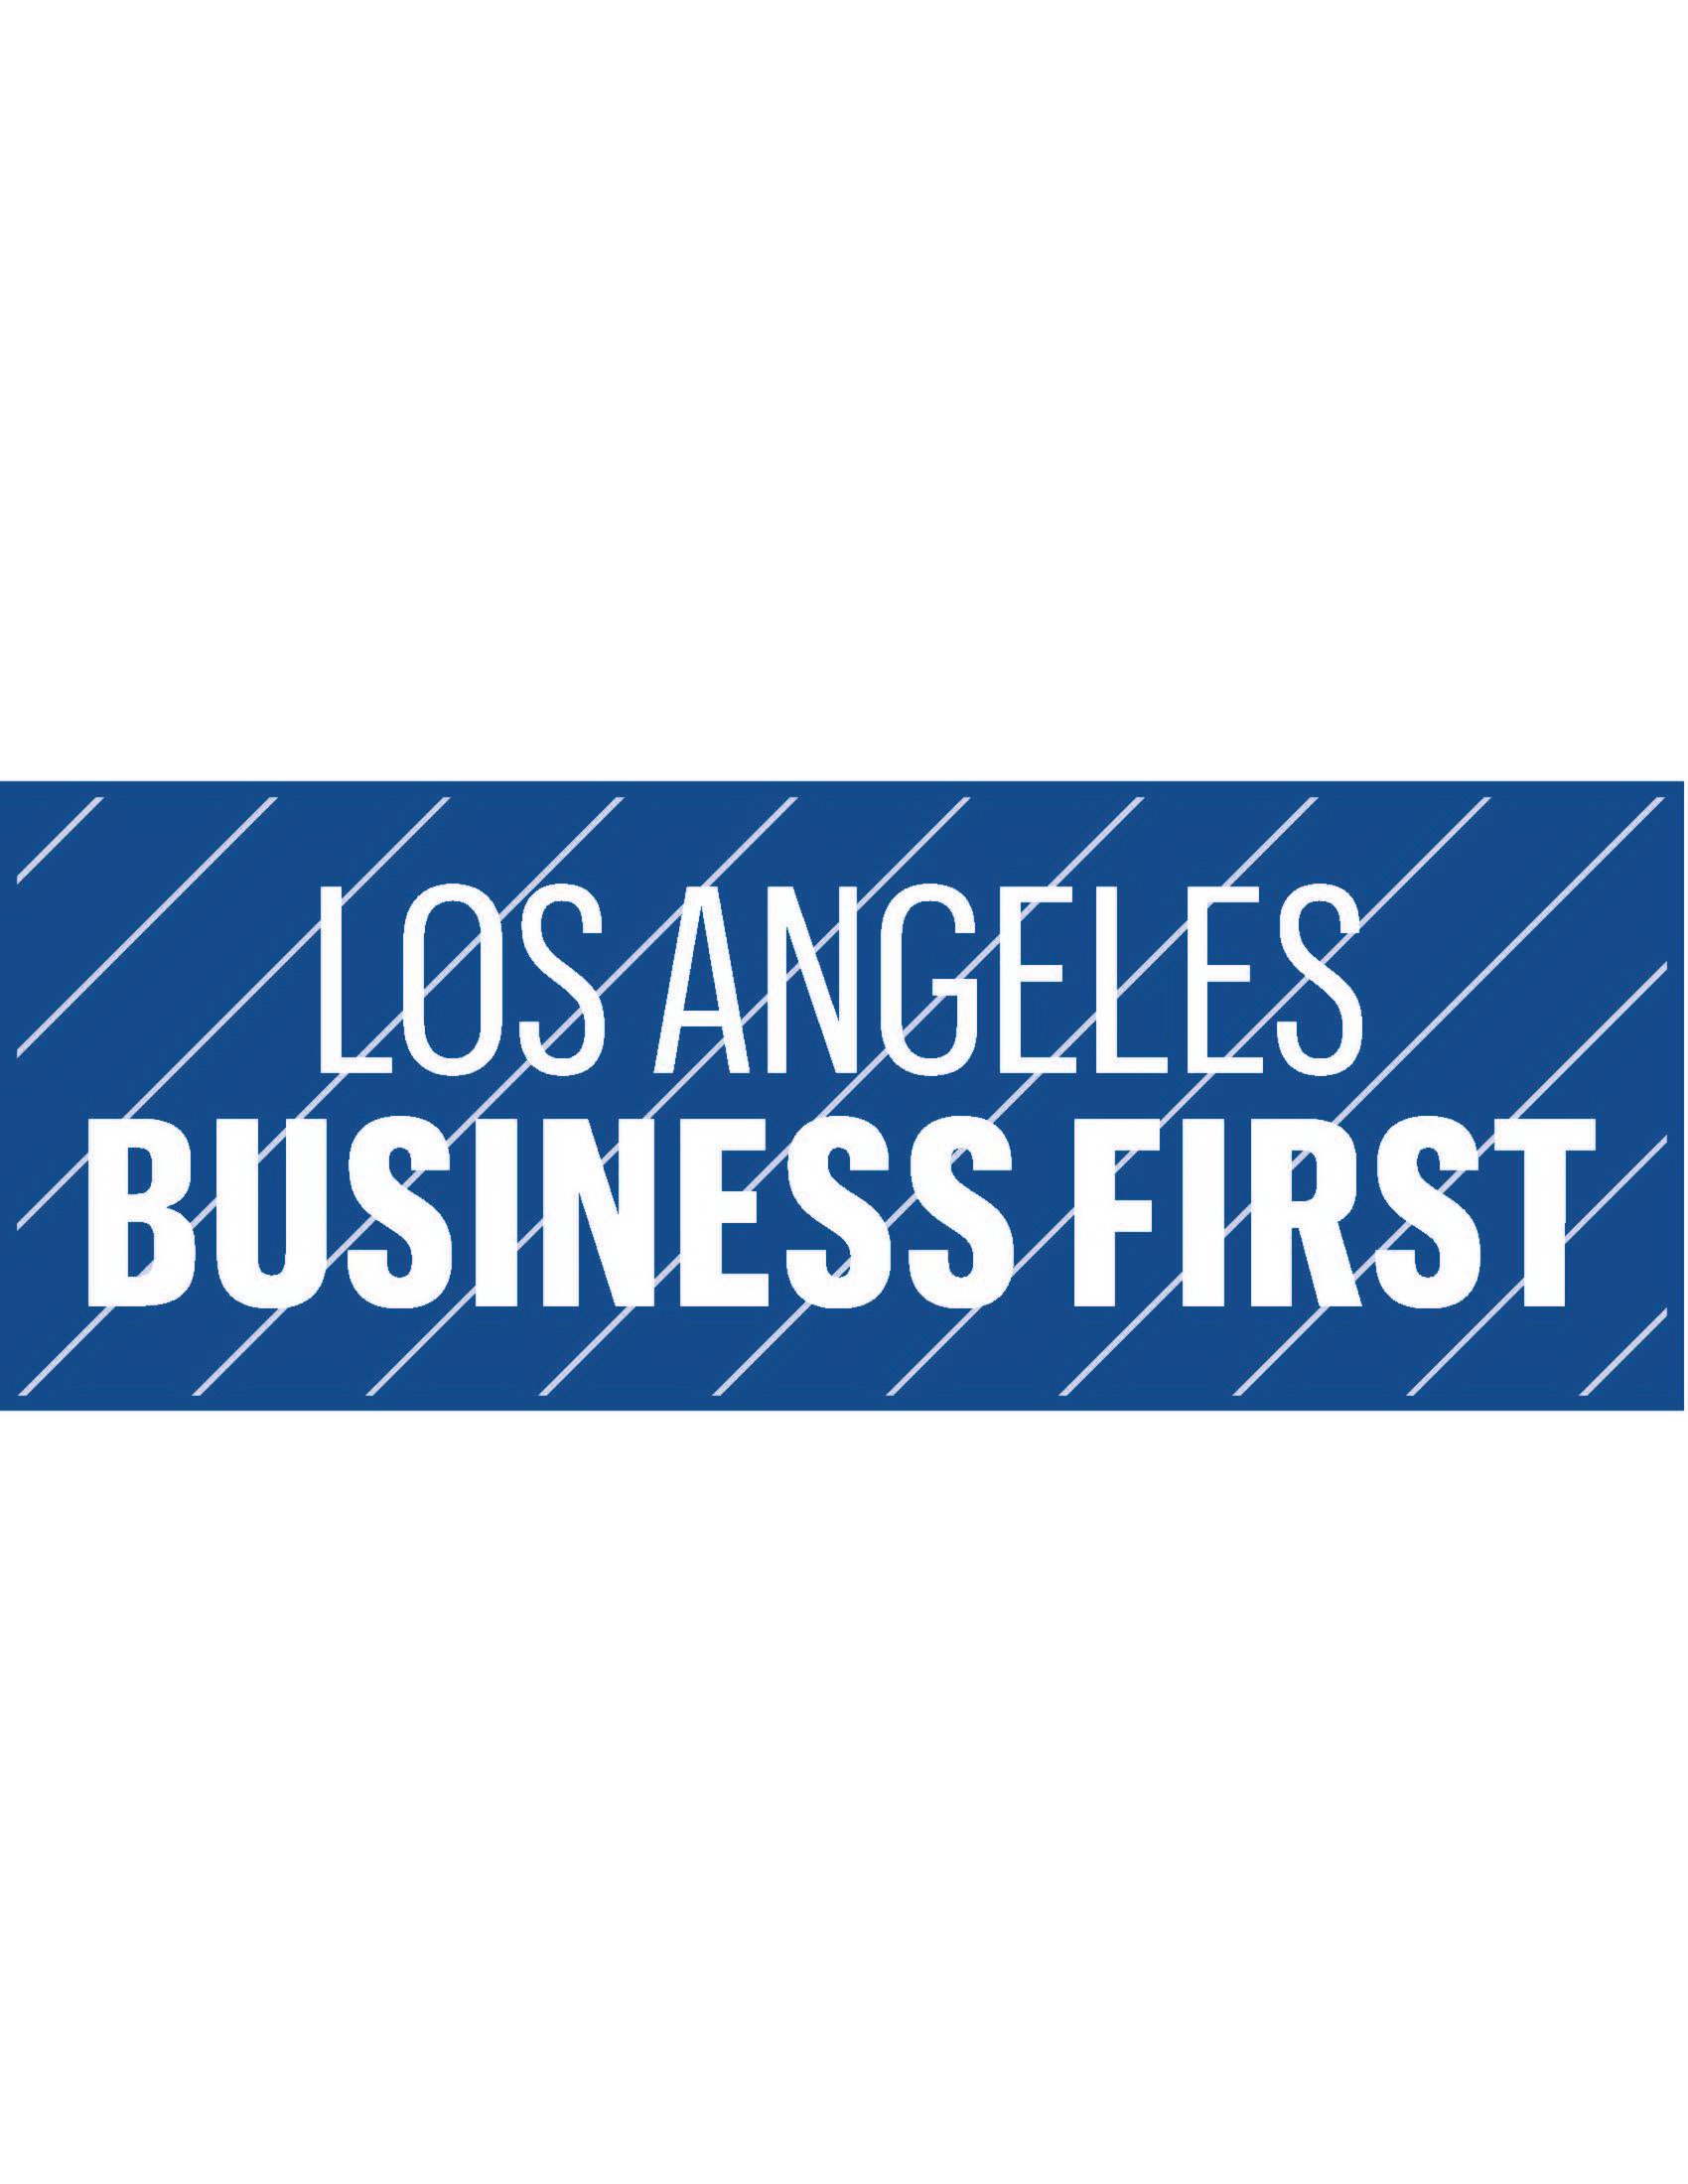 LOS ANGELES BUSINESS FIRST